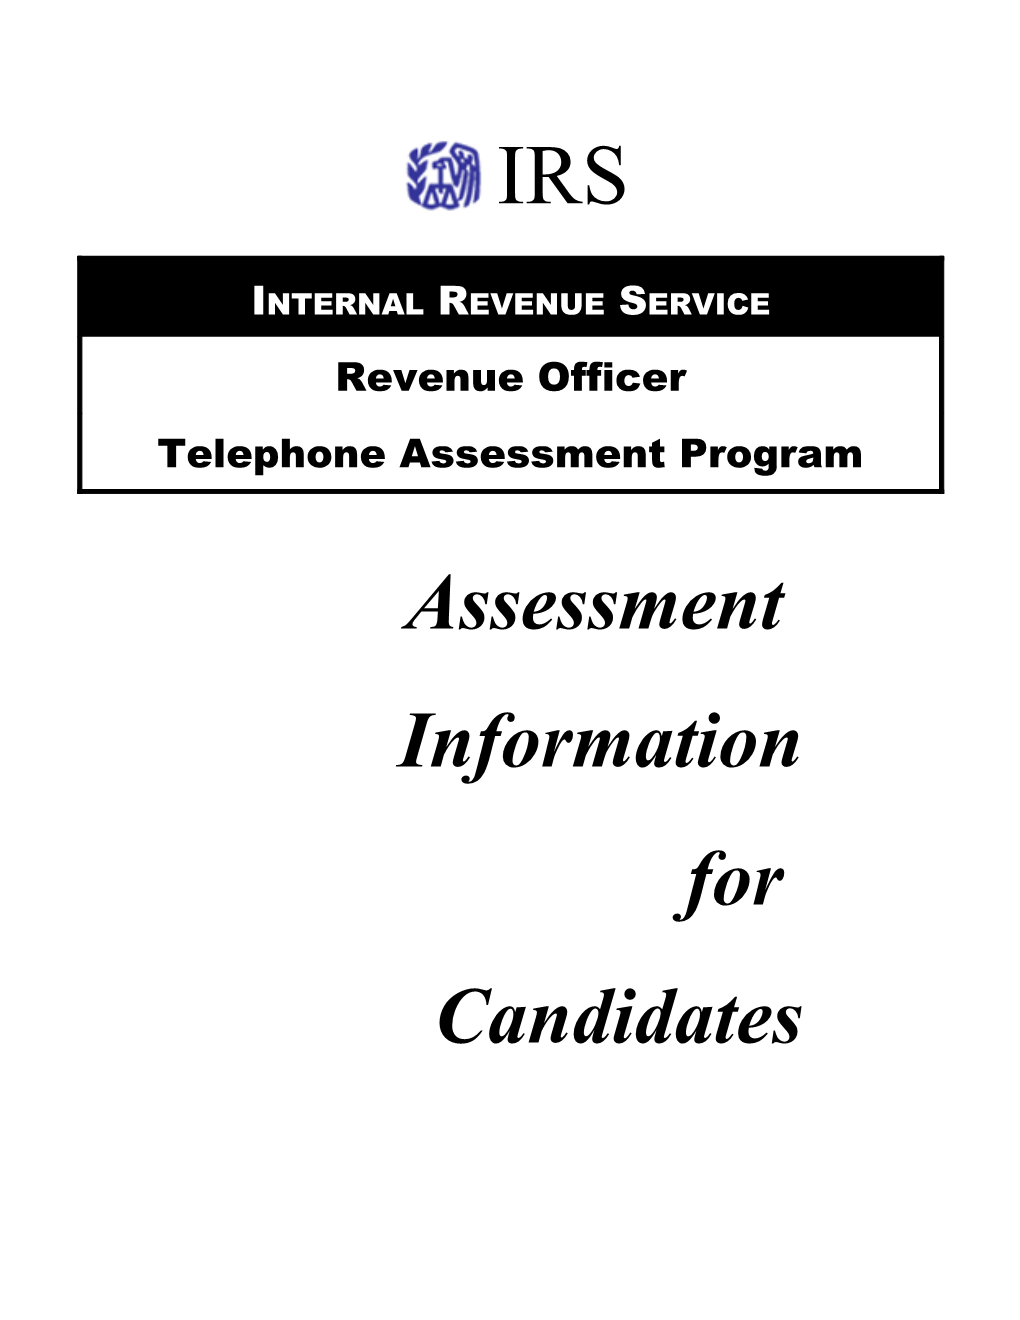 What Is the Telephone Assessment Program?